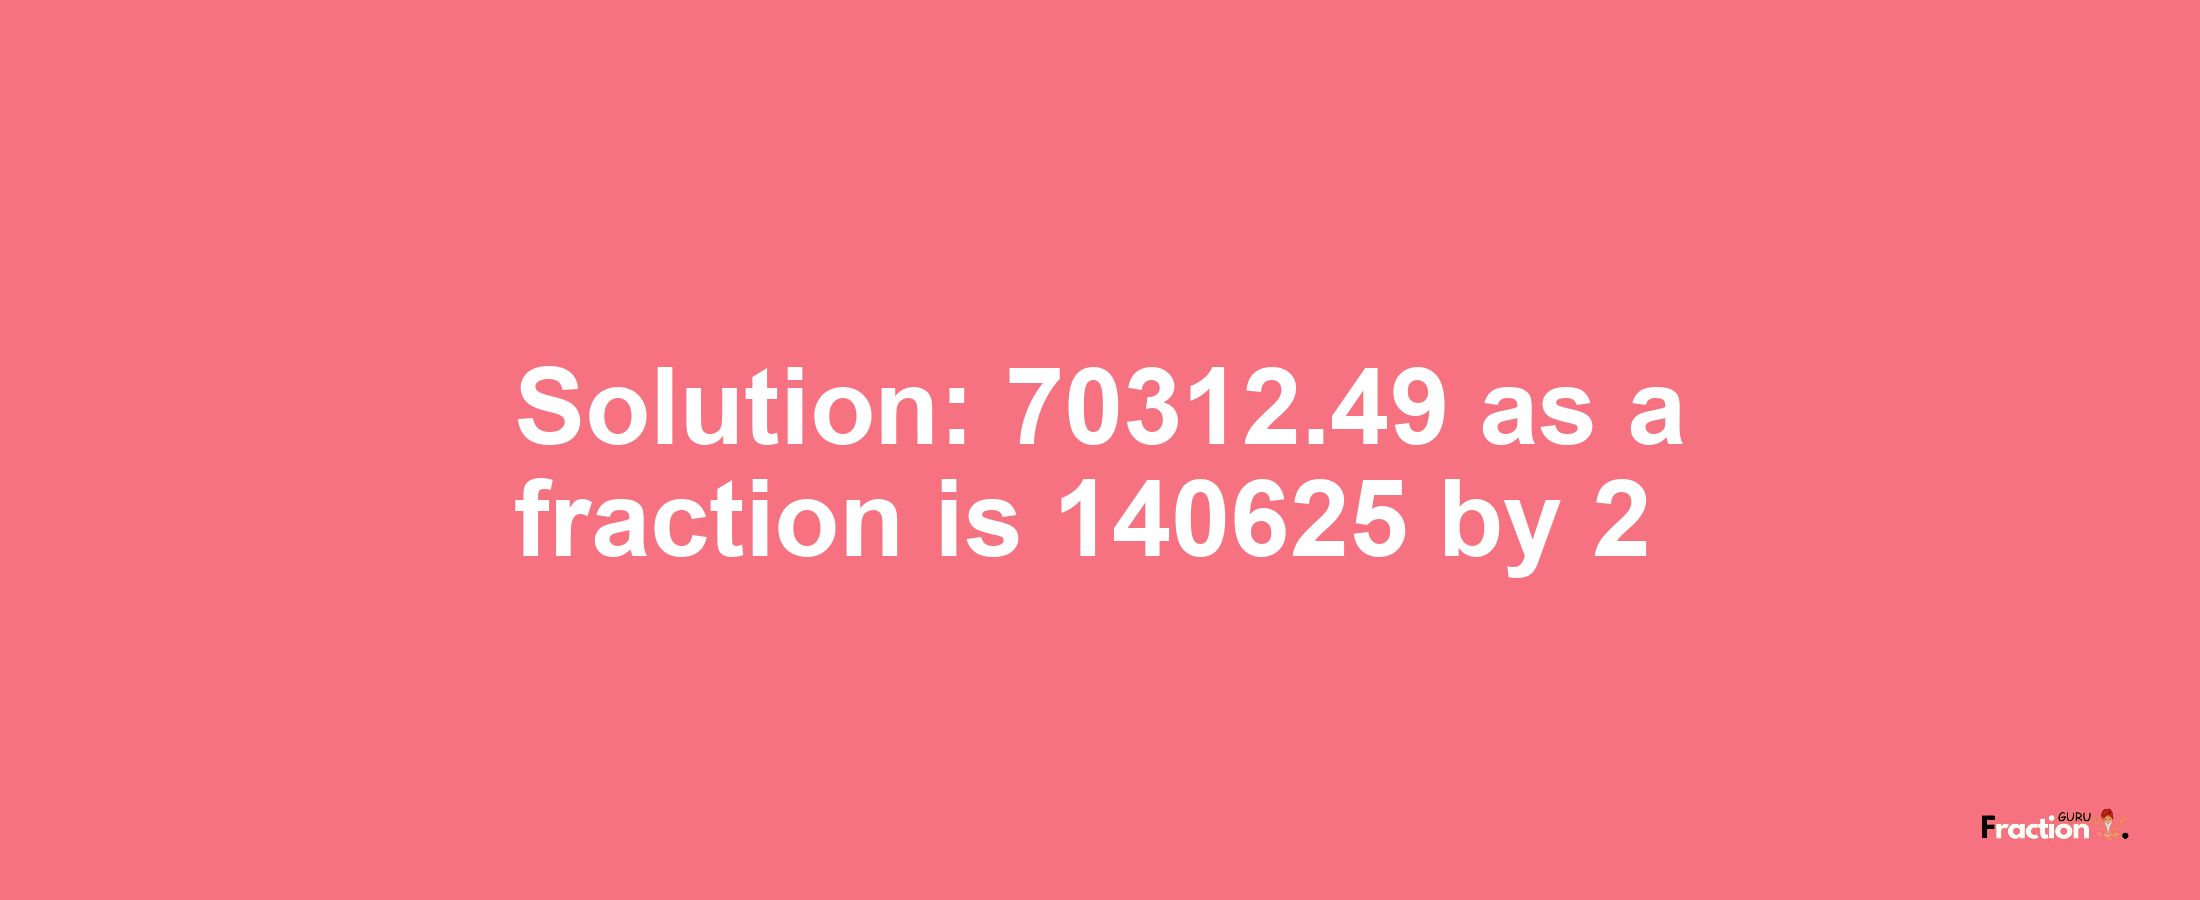 Solution:70312.49 as a fraction is 140625/2